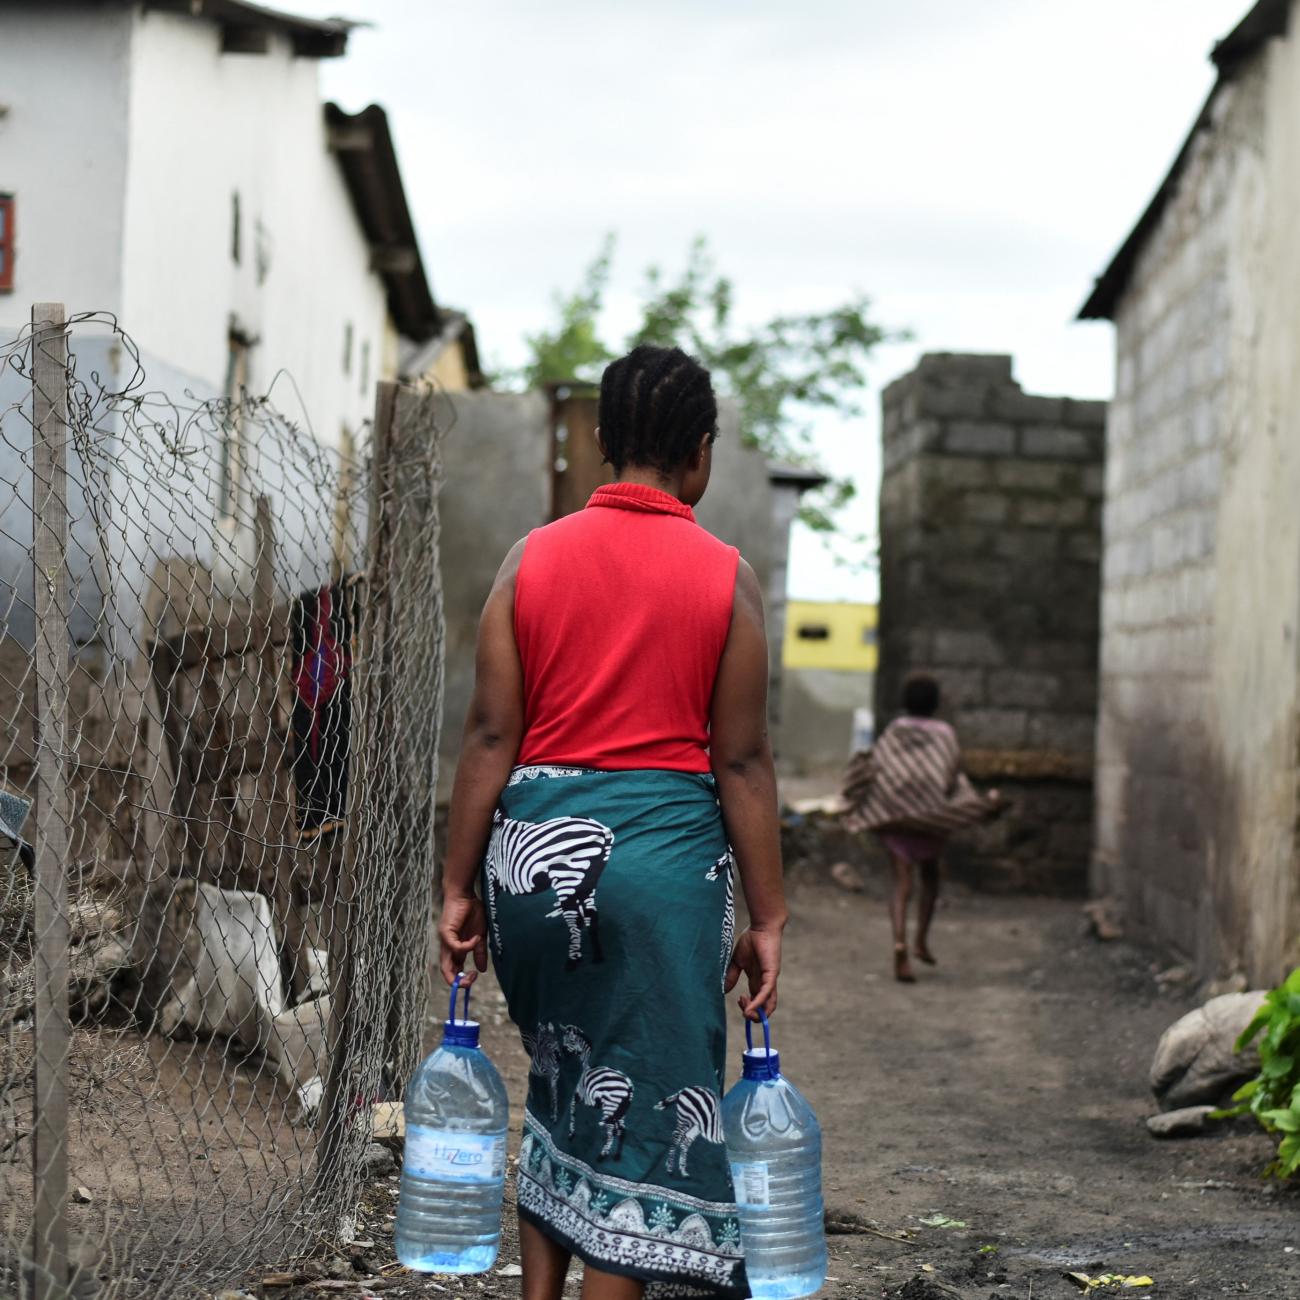 A woman carries bottles of water in a neighborhood affected by the cholera outbreak.